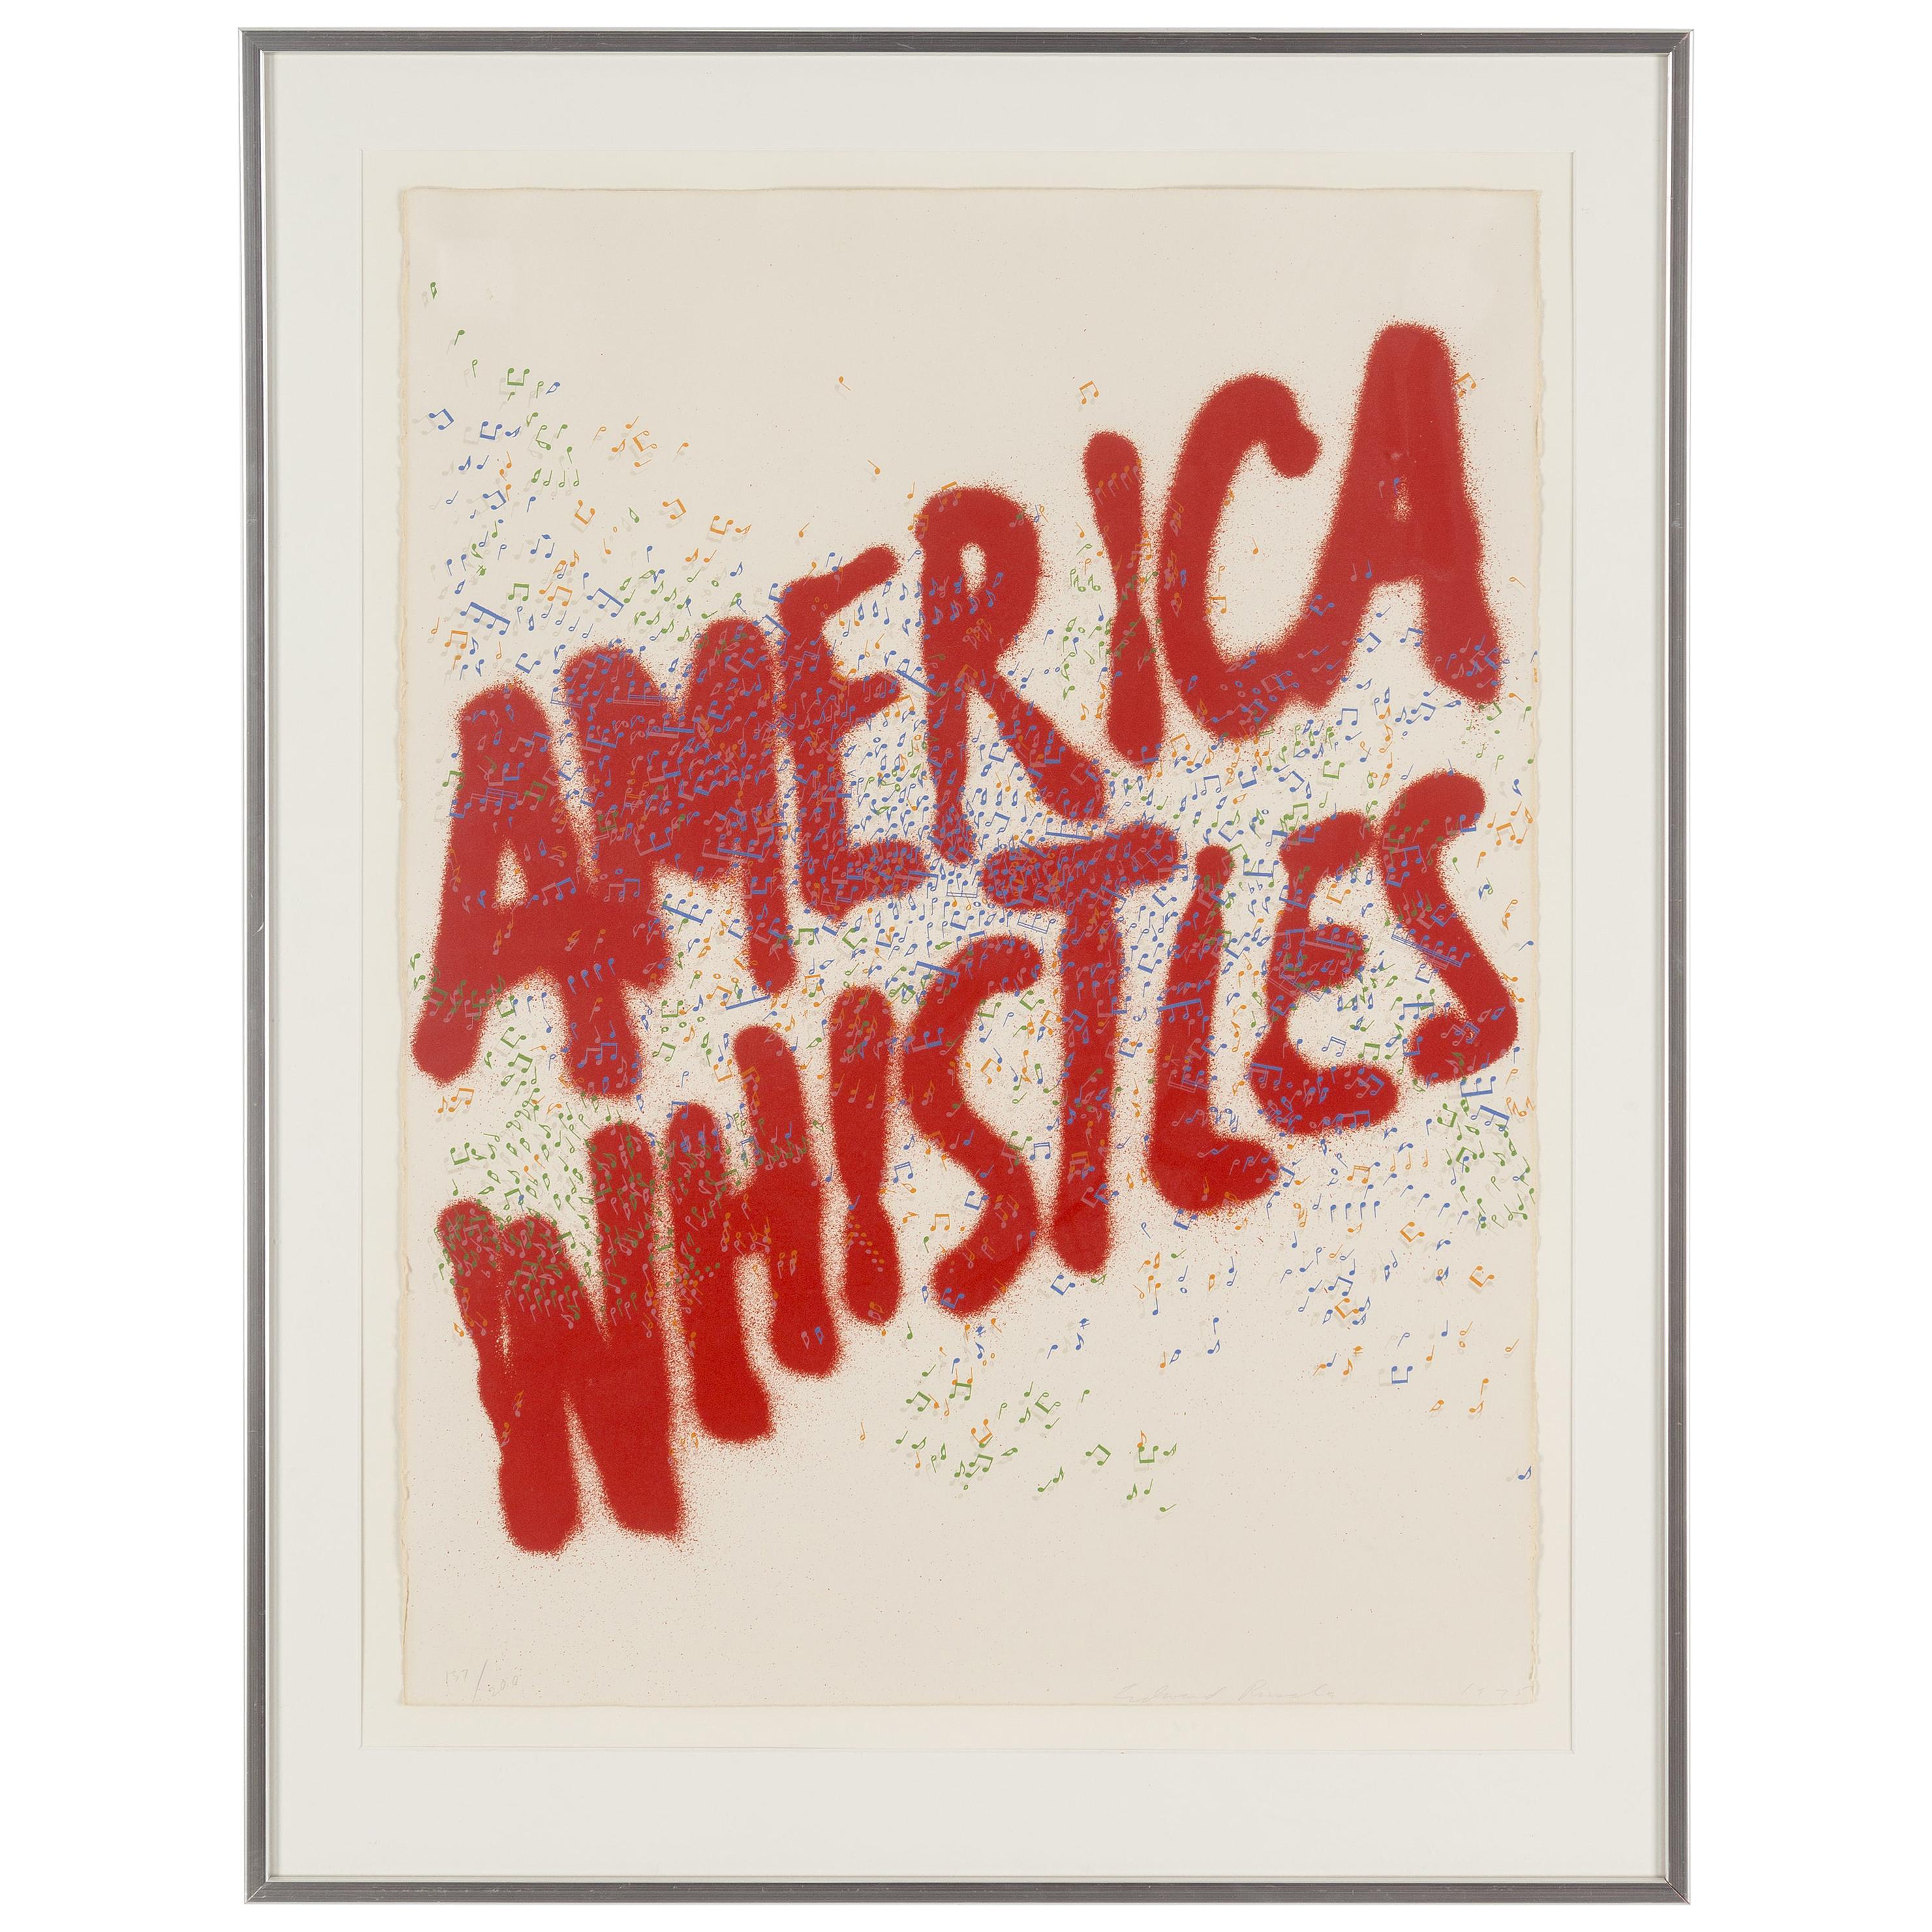 Ed Ruscha Lithograph "America Whistles", Signed